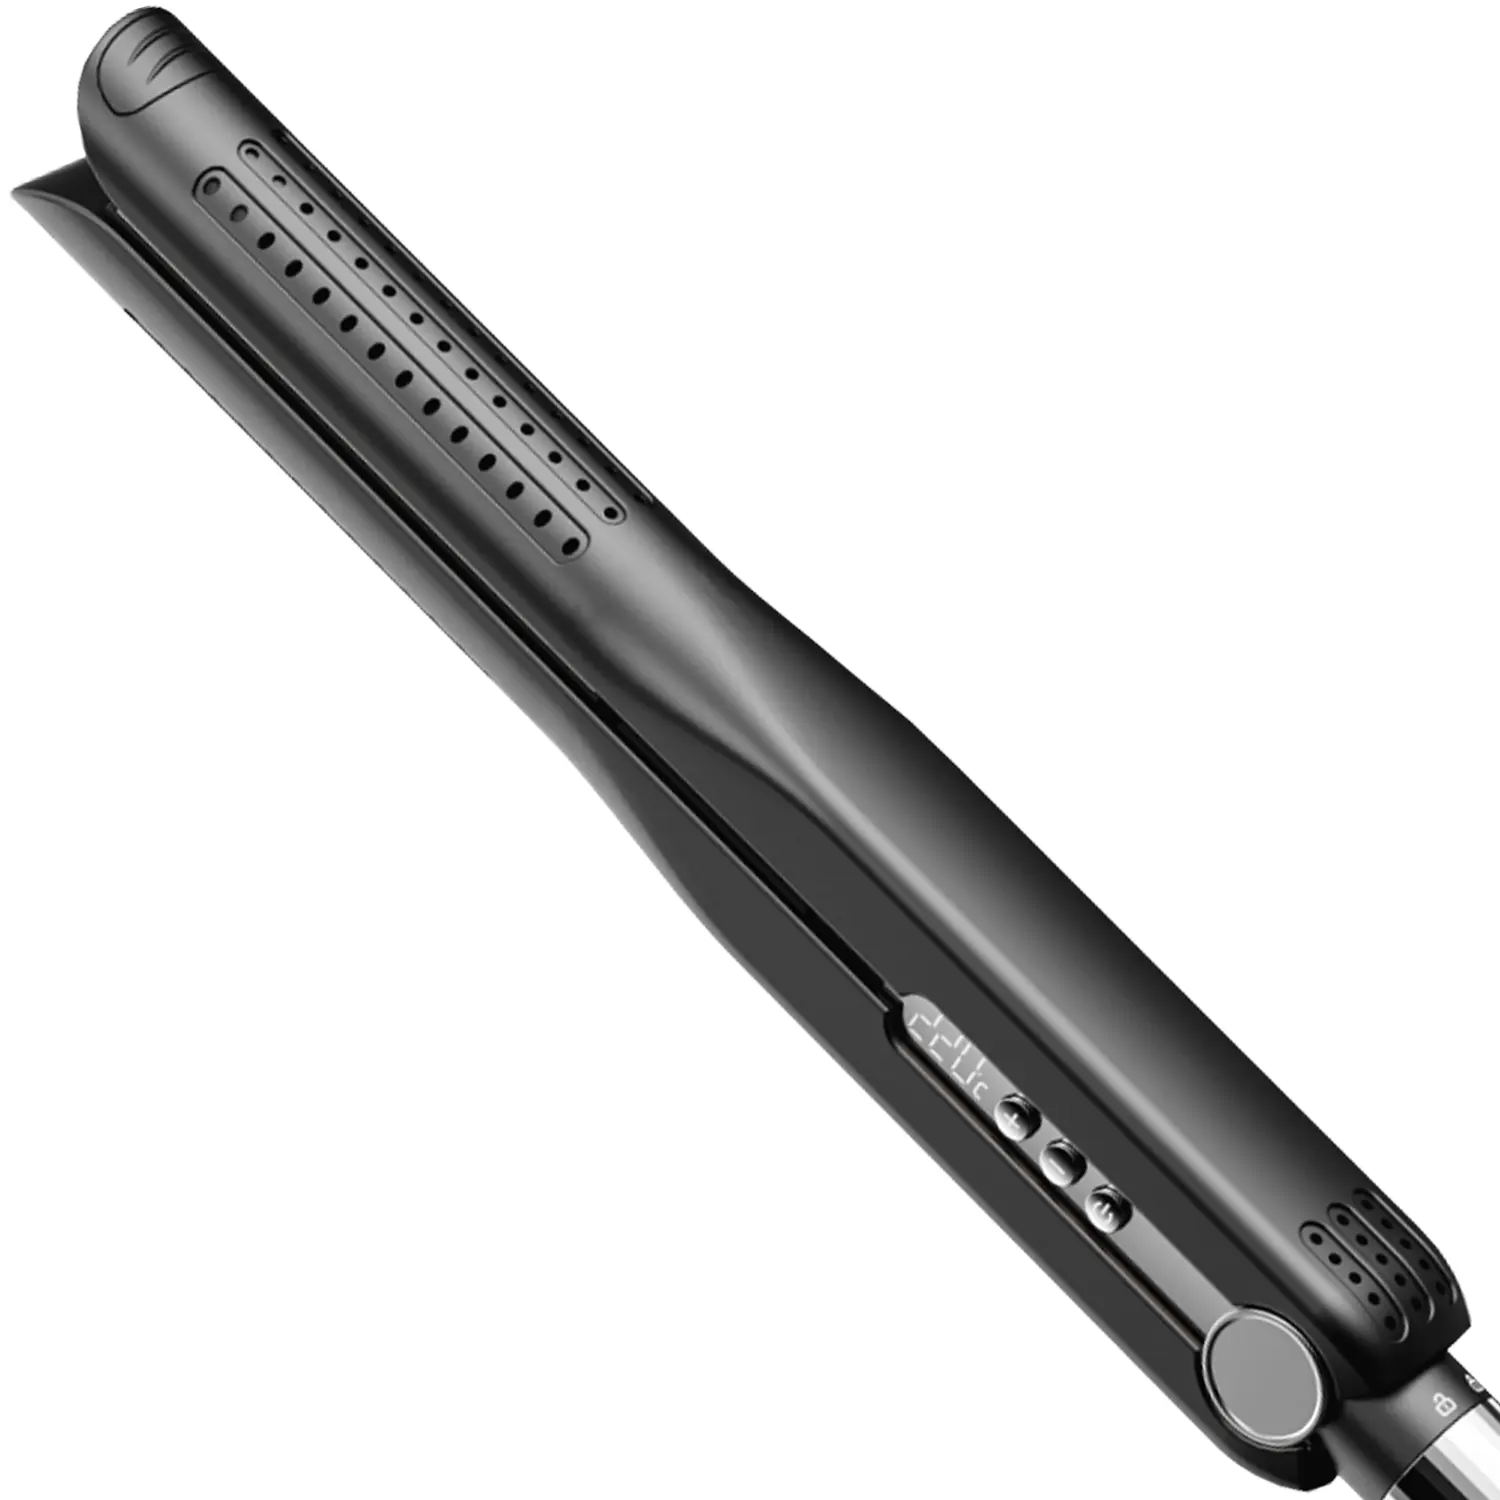 OEM New Portable 2-in-1 Hair Straightener Curler with Negative Ion & Cool Airflow Extra Long Flat Iron For Salon Household Use